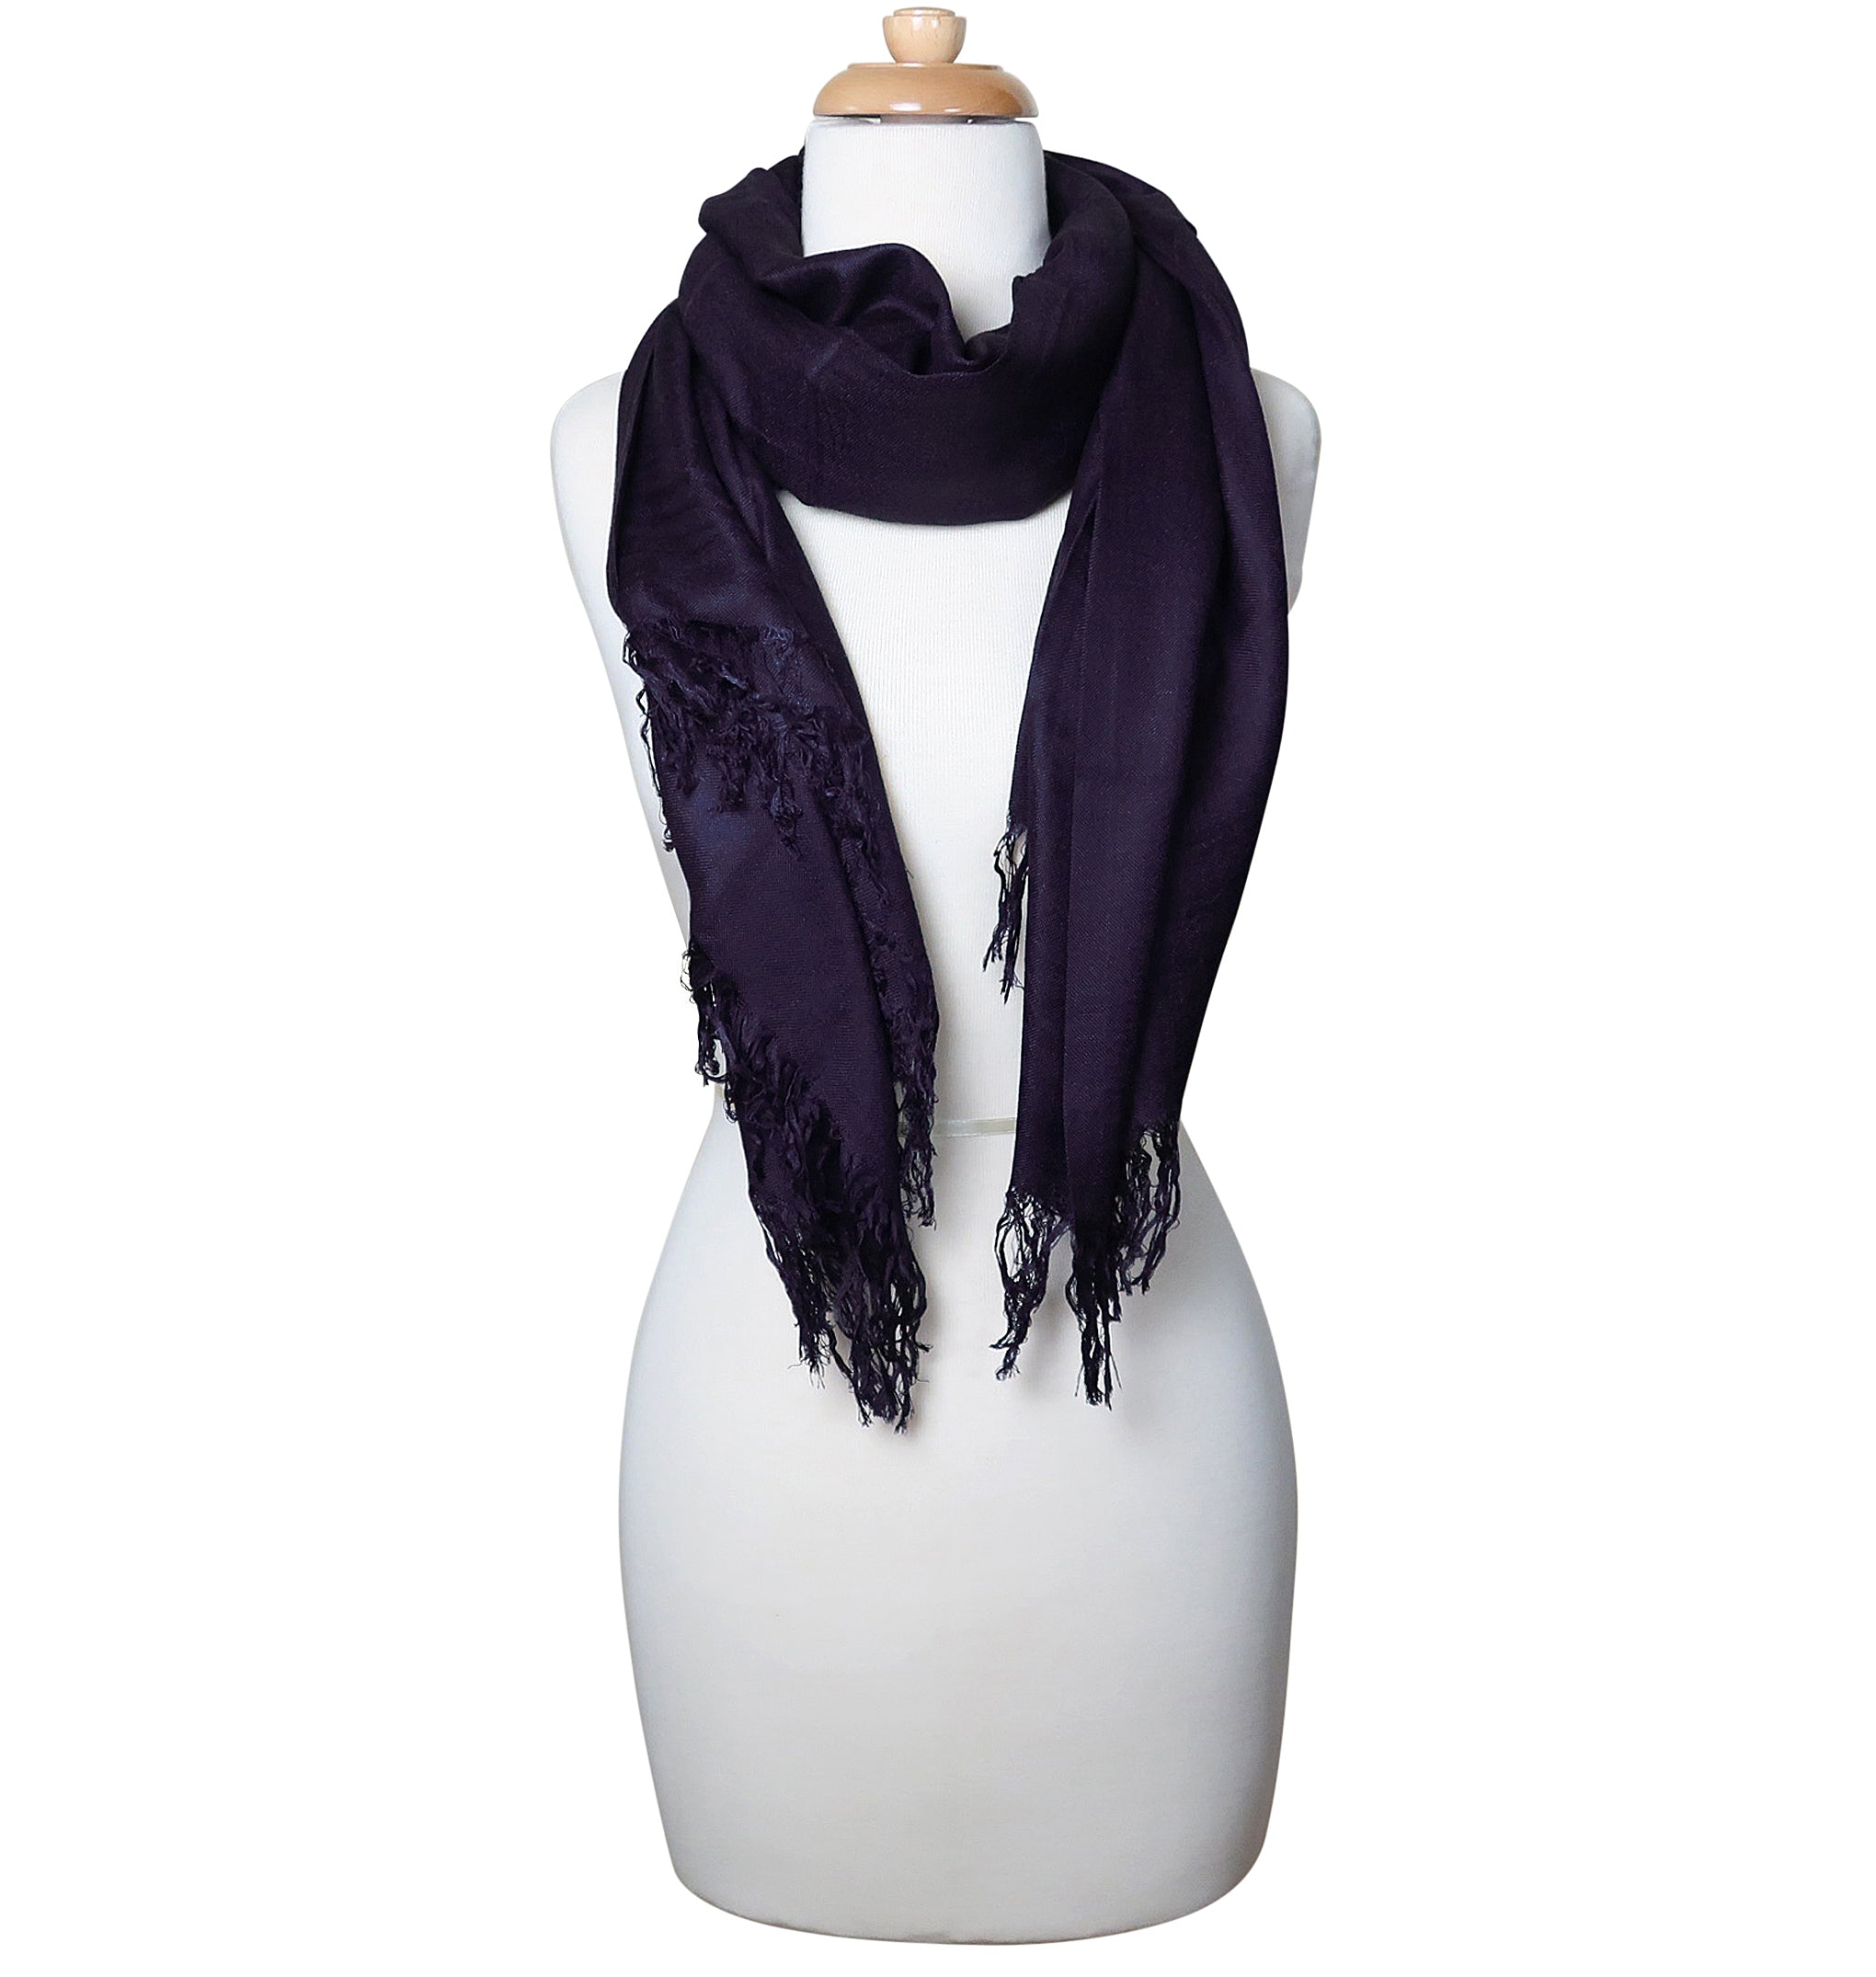 Blue Pacific Tissue Solid Modal and Cashmere Scarf in Dark Purple